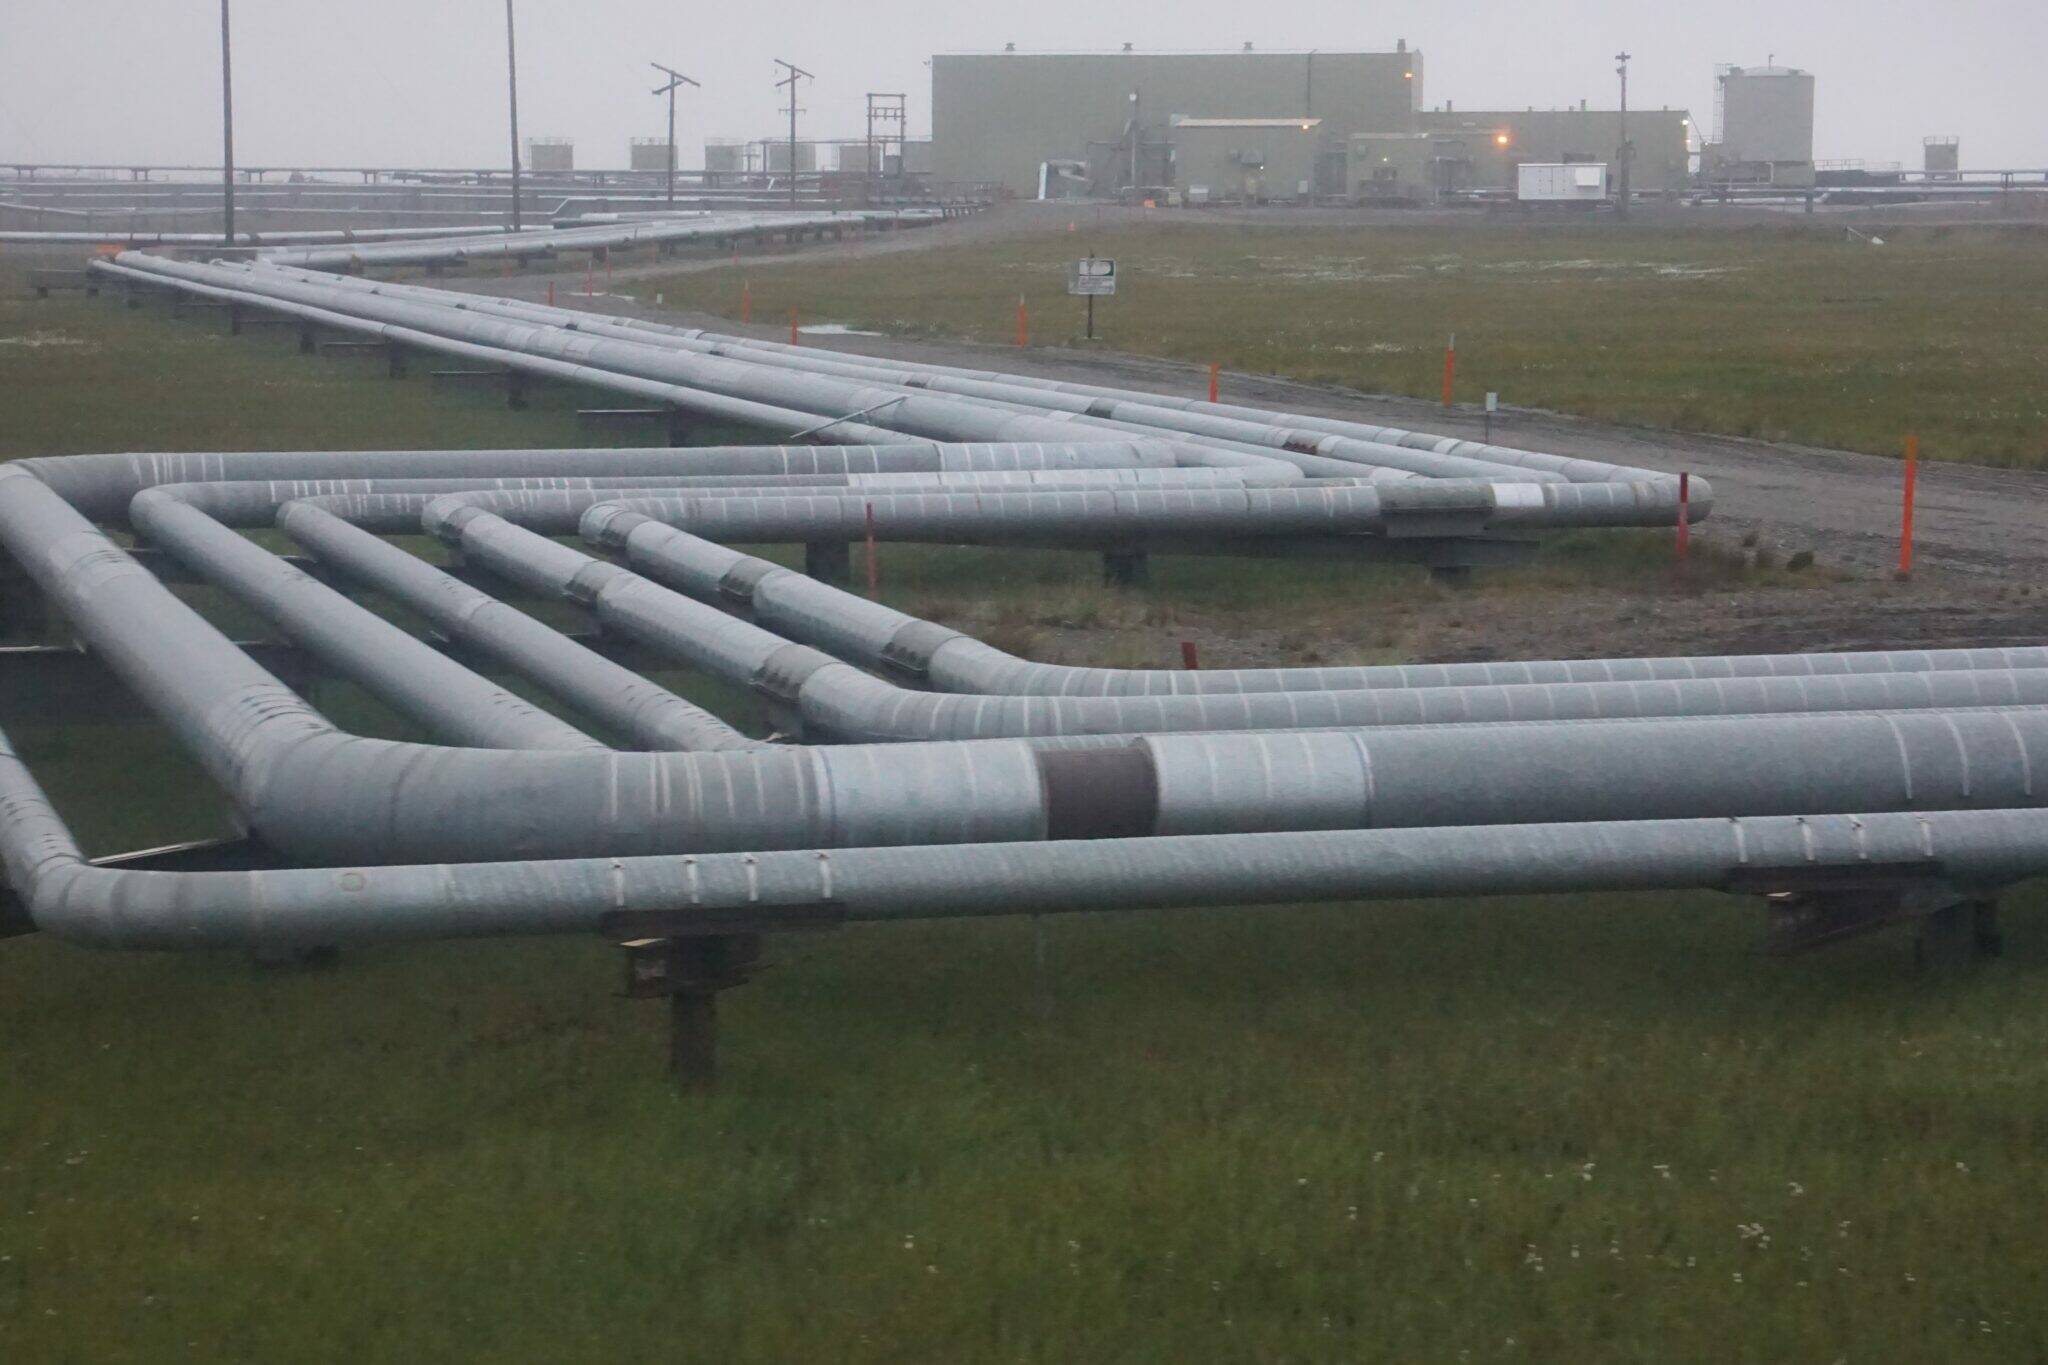 A network of pipelines, seen on Aug. 23, 2018, snakes through a portion of the Greater Prudhoe Bay Unit on Alaska’s North Slope. The oil and gas industry has more impact on Alaska’s economy than any other industry, a new study finds. (Photo by Yereth Rosen/Alaska Beacon)